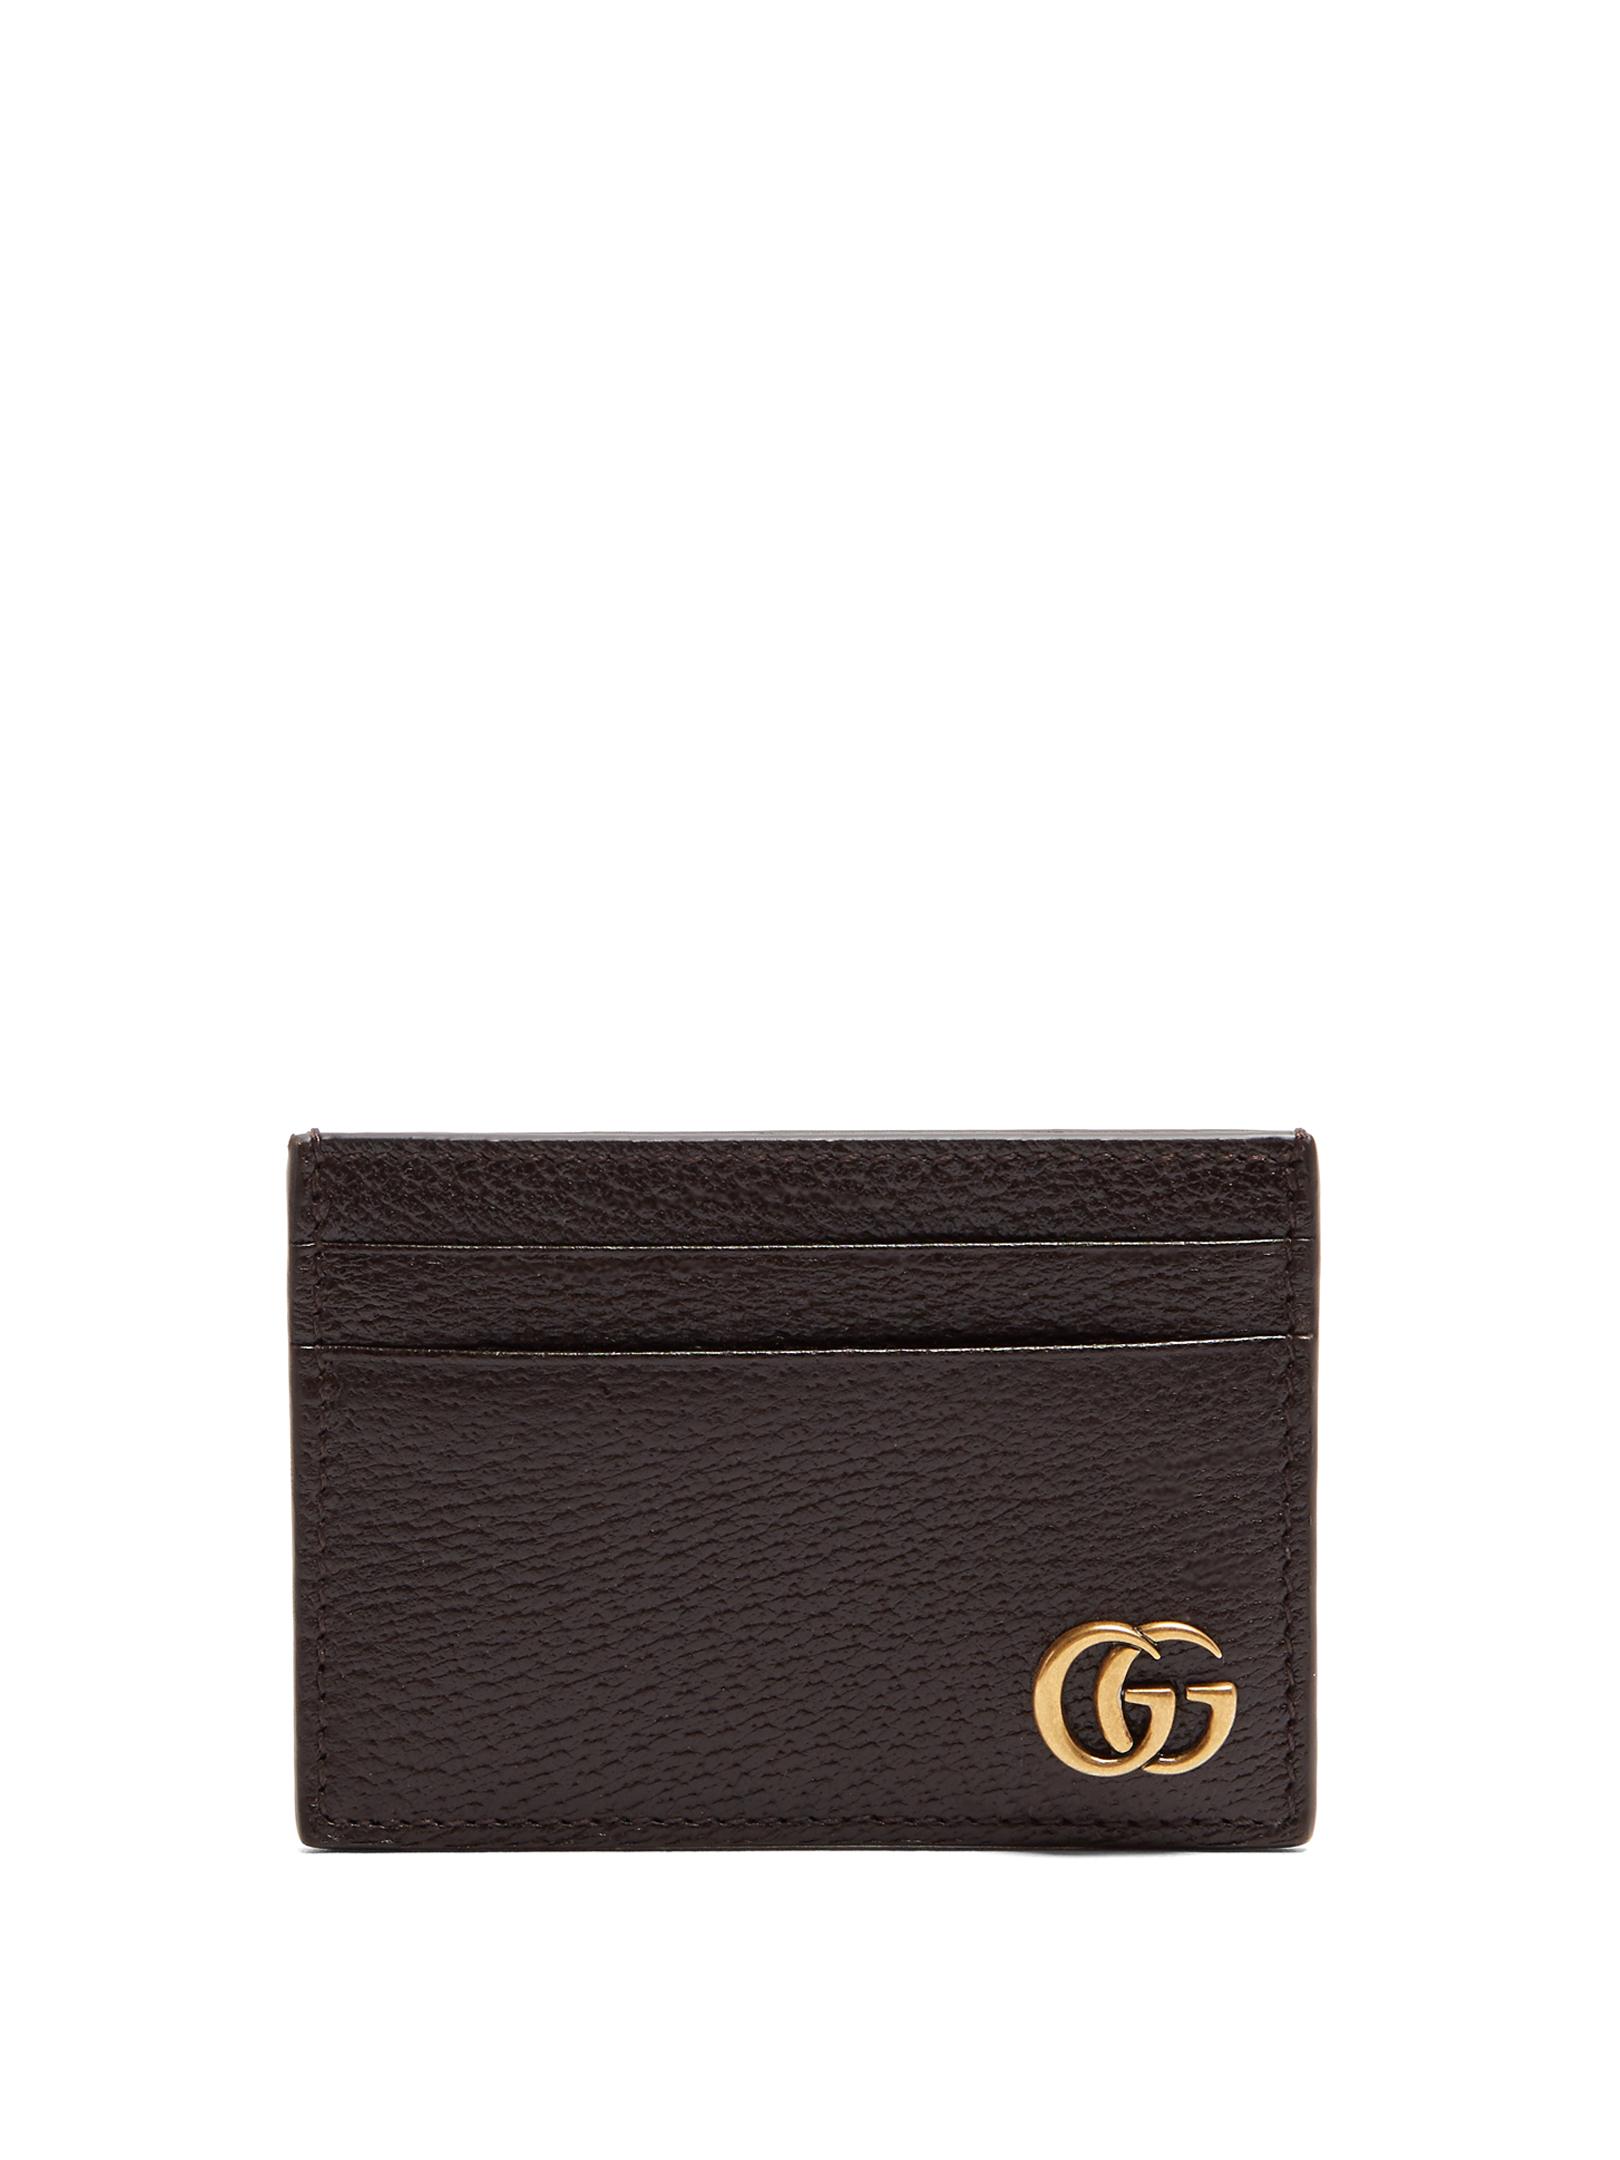 Gucci Marmont Leather Money-clip And Cardholder in Brown for Men